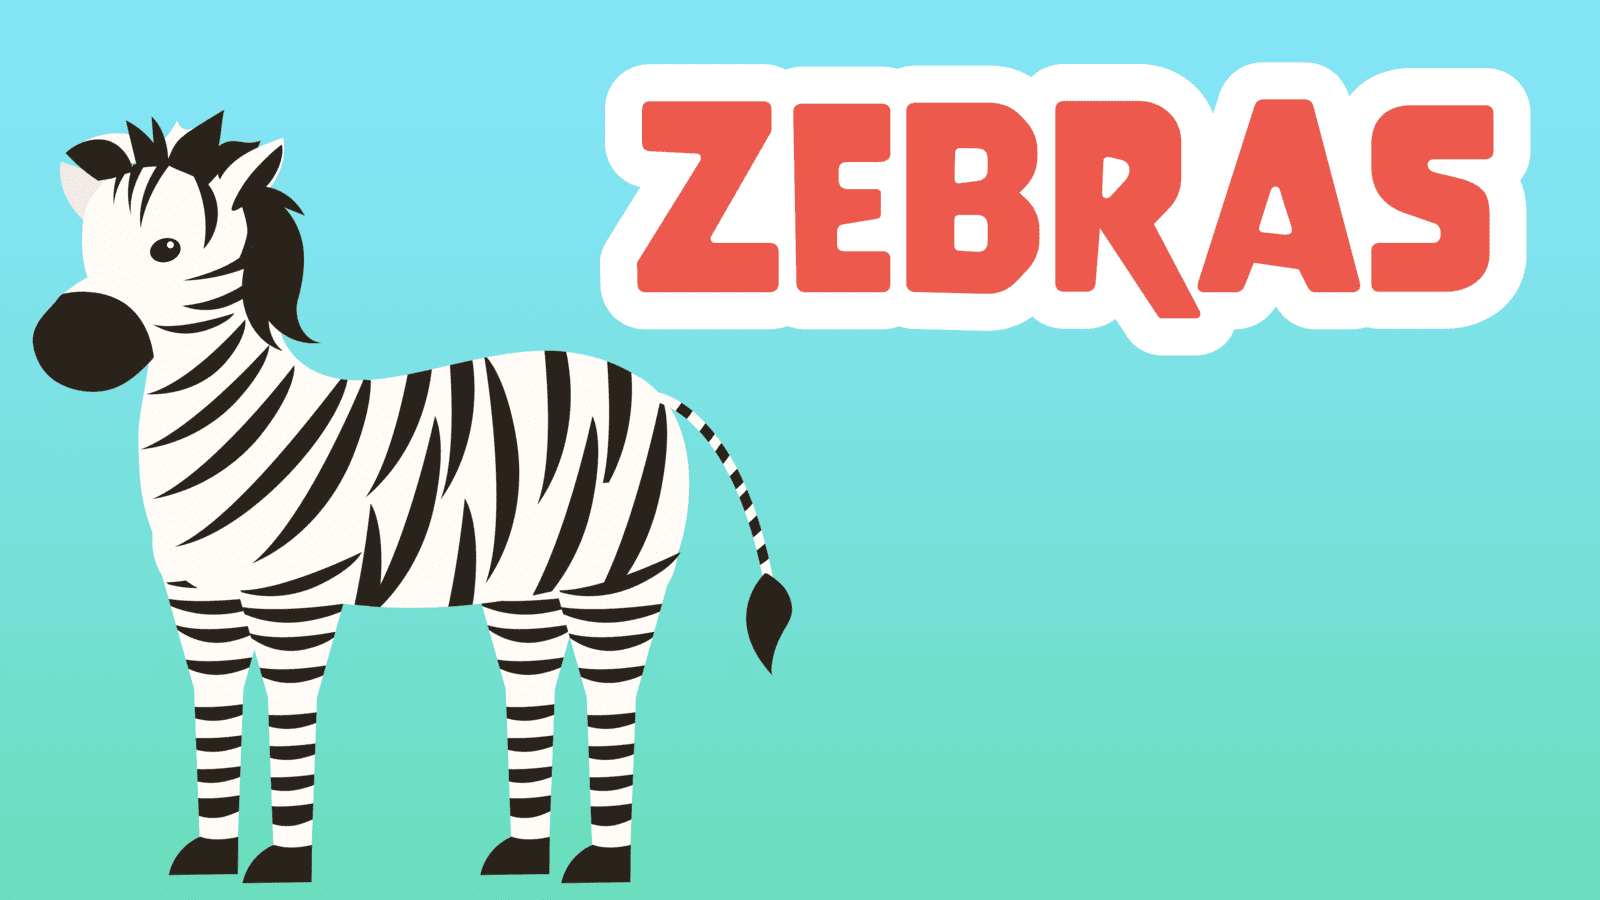 Zebras Facts for Kids – The 5 Amazing Facts about Zebras